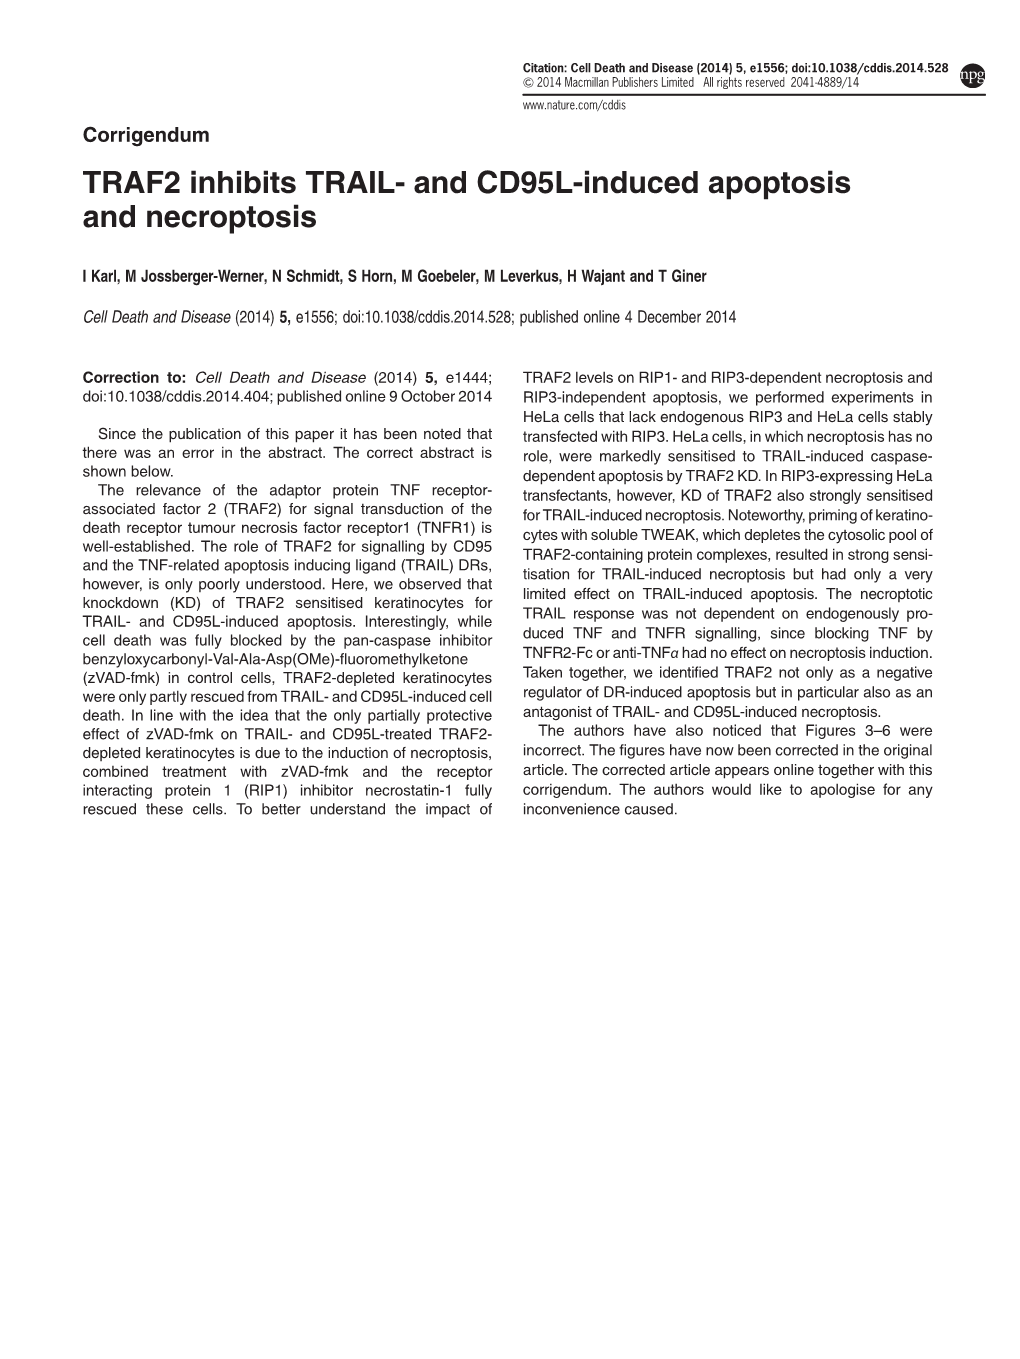 And CD95L-Induced Apoptosis and Necroptosis